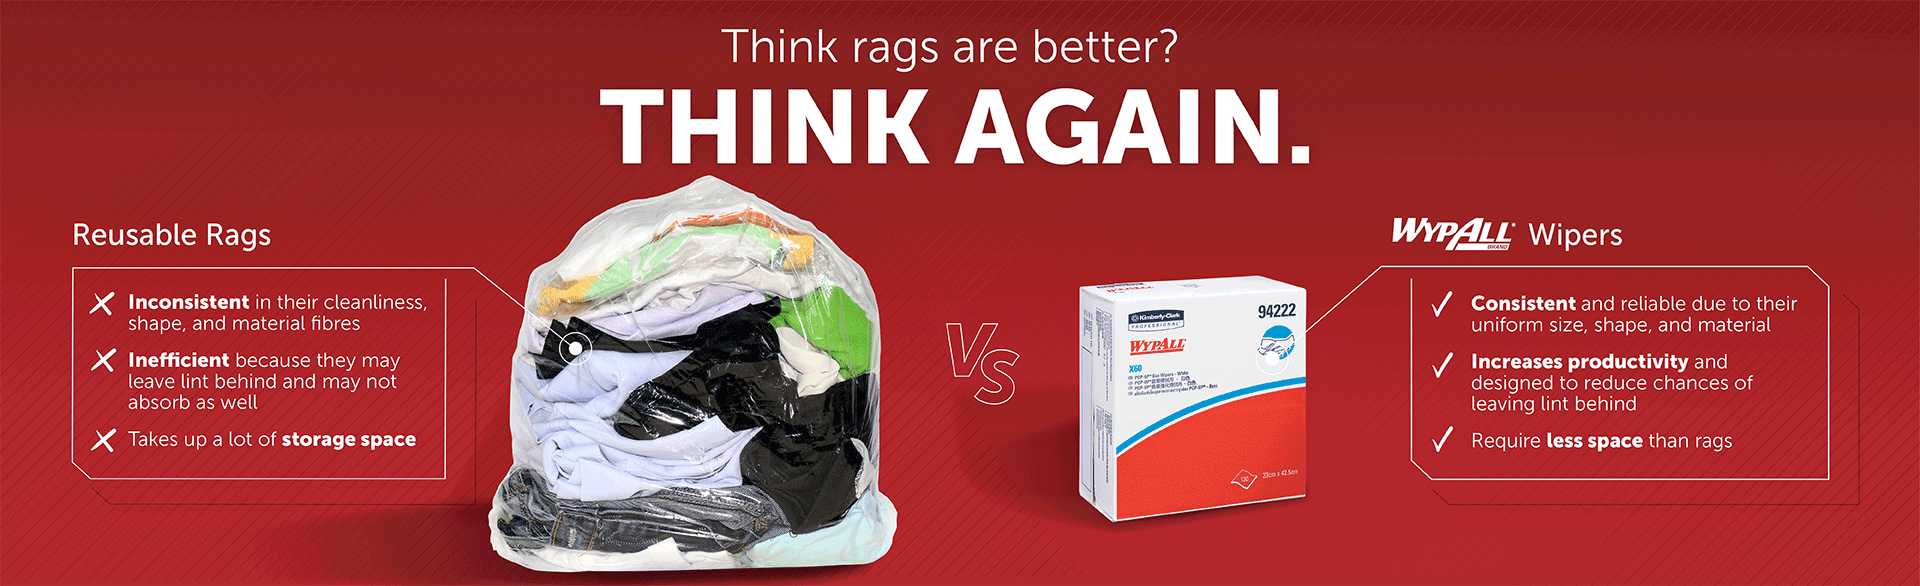 Think rags are better? THINK AGAIN.